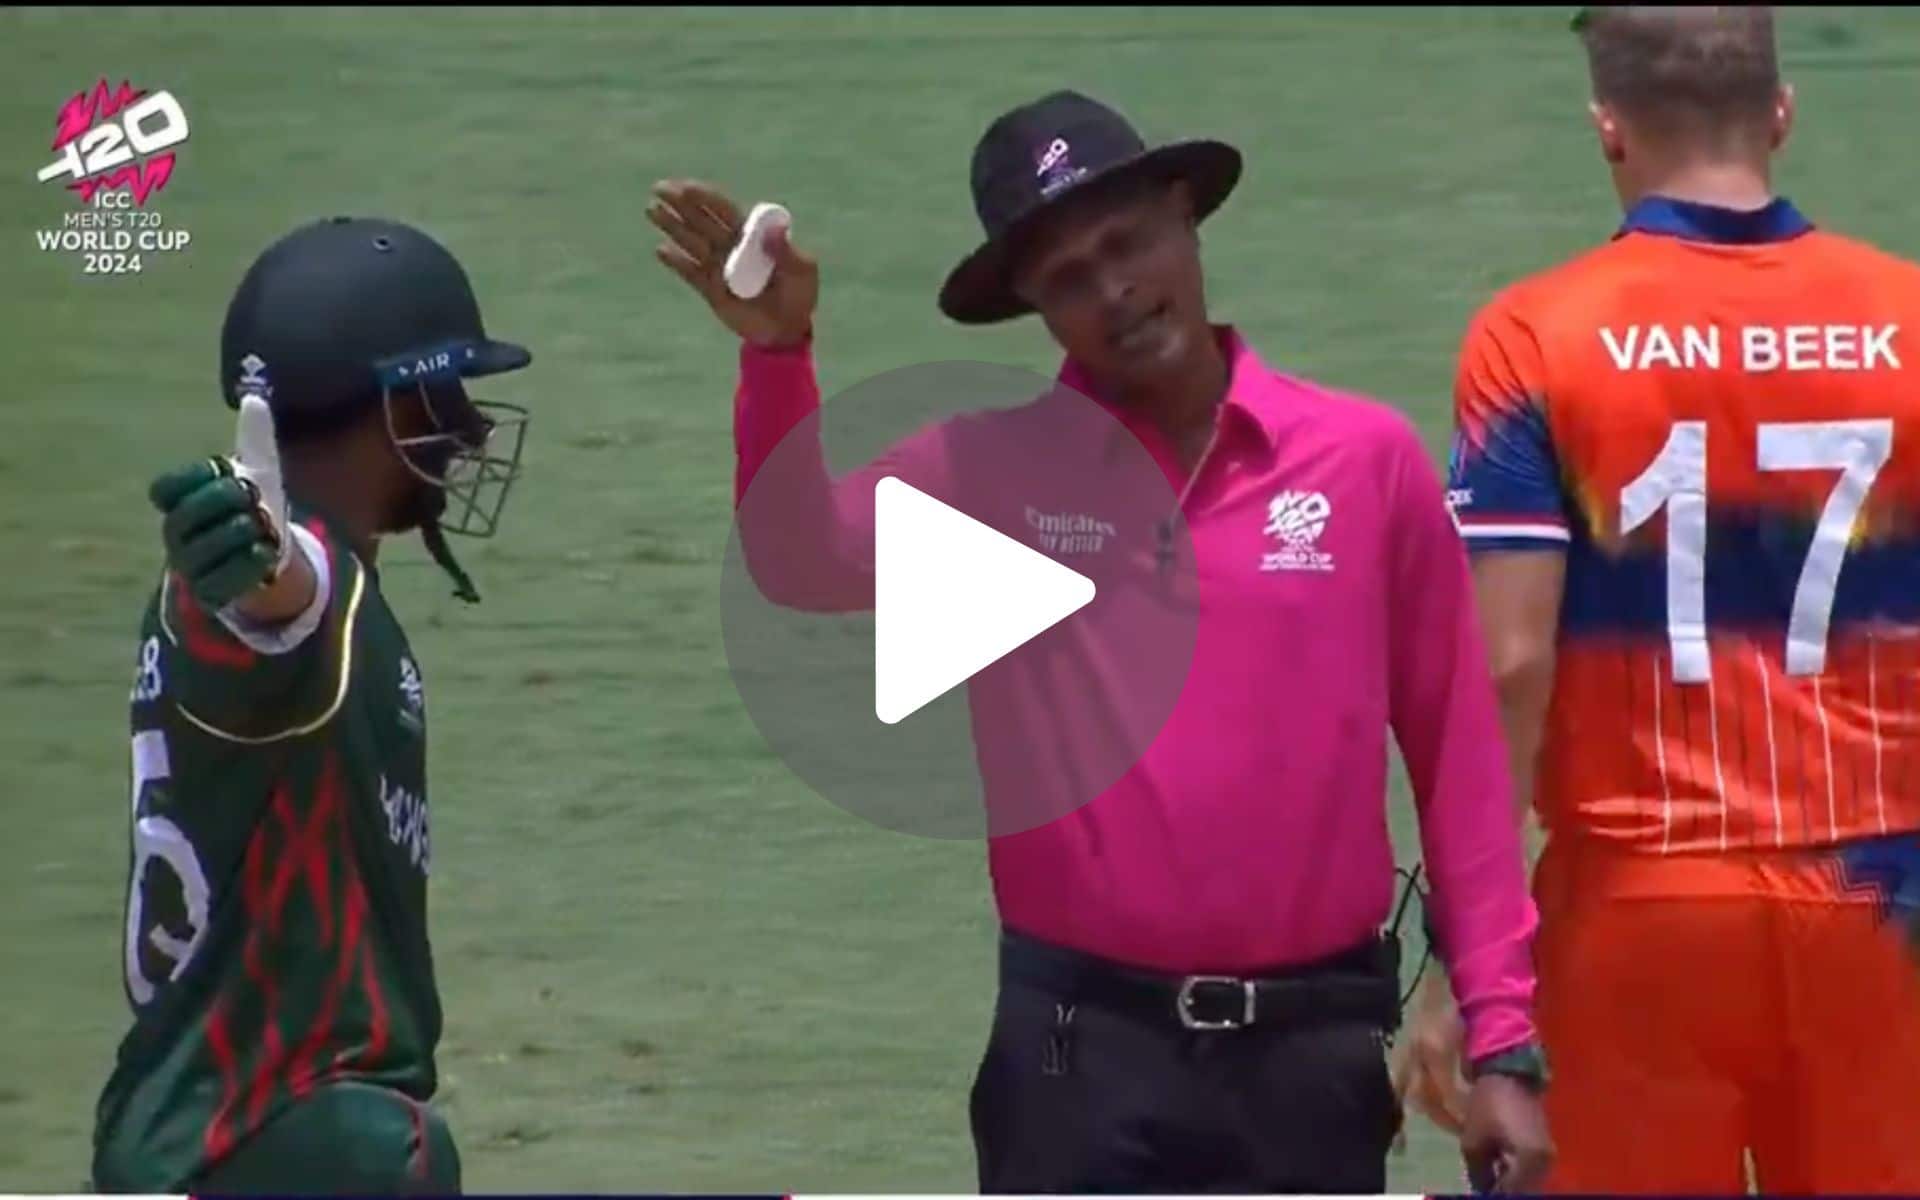 [Watch] Shakib Al Hasan Loses Cool Again; Gets Into An Heated Argument With Umpire vs NED